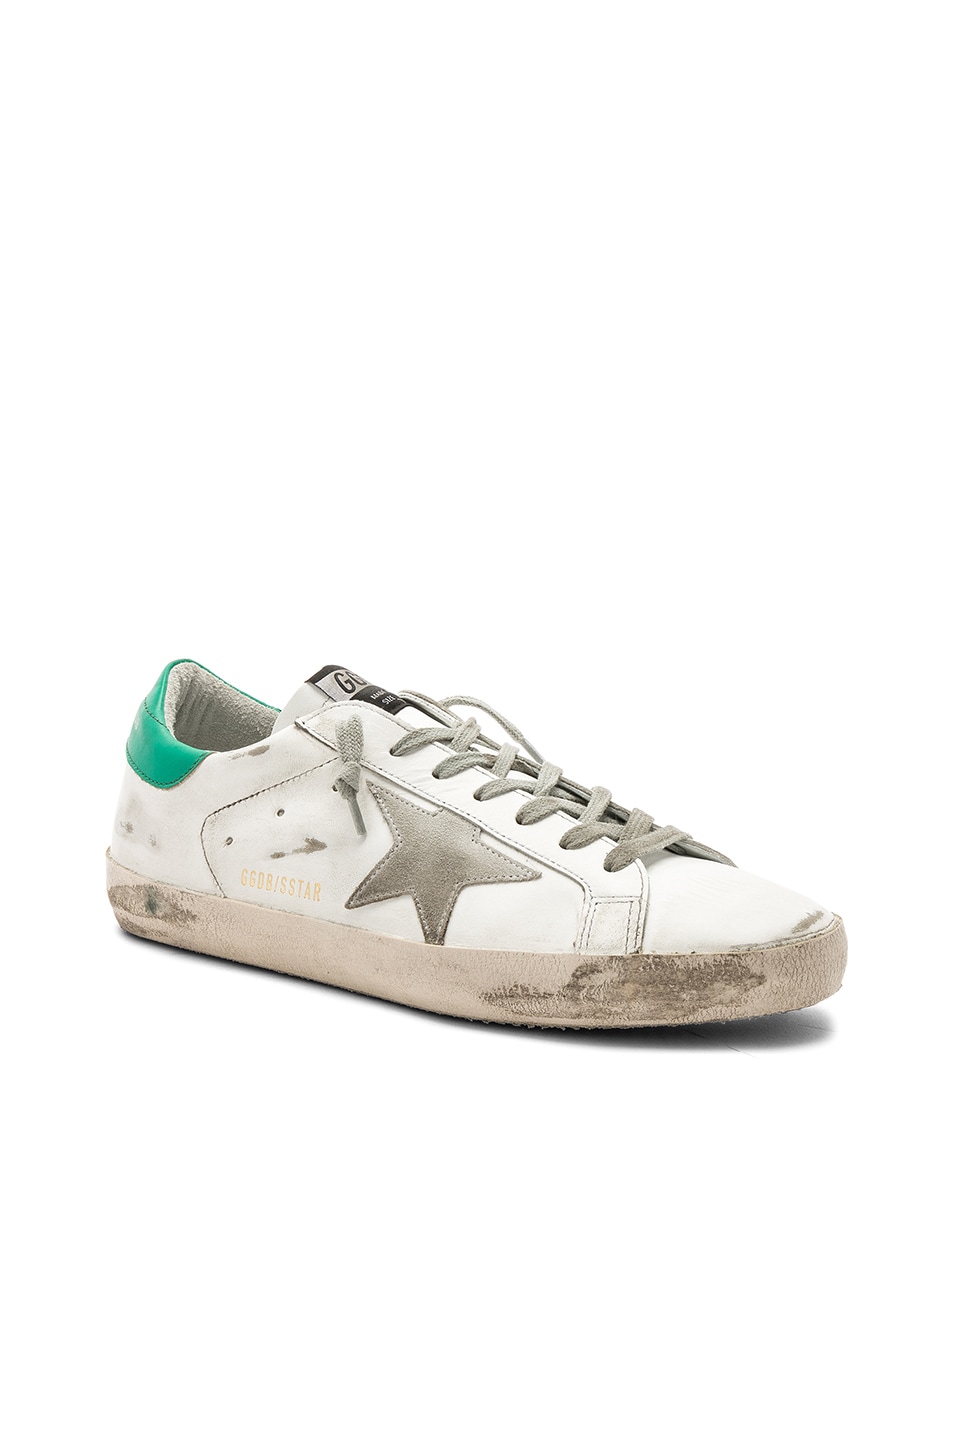 Image 1 of Golden Goose Superstar Sneakers in White & Mint Green & Ice